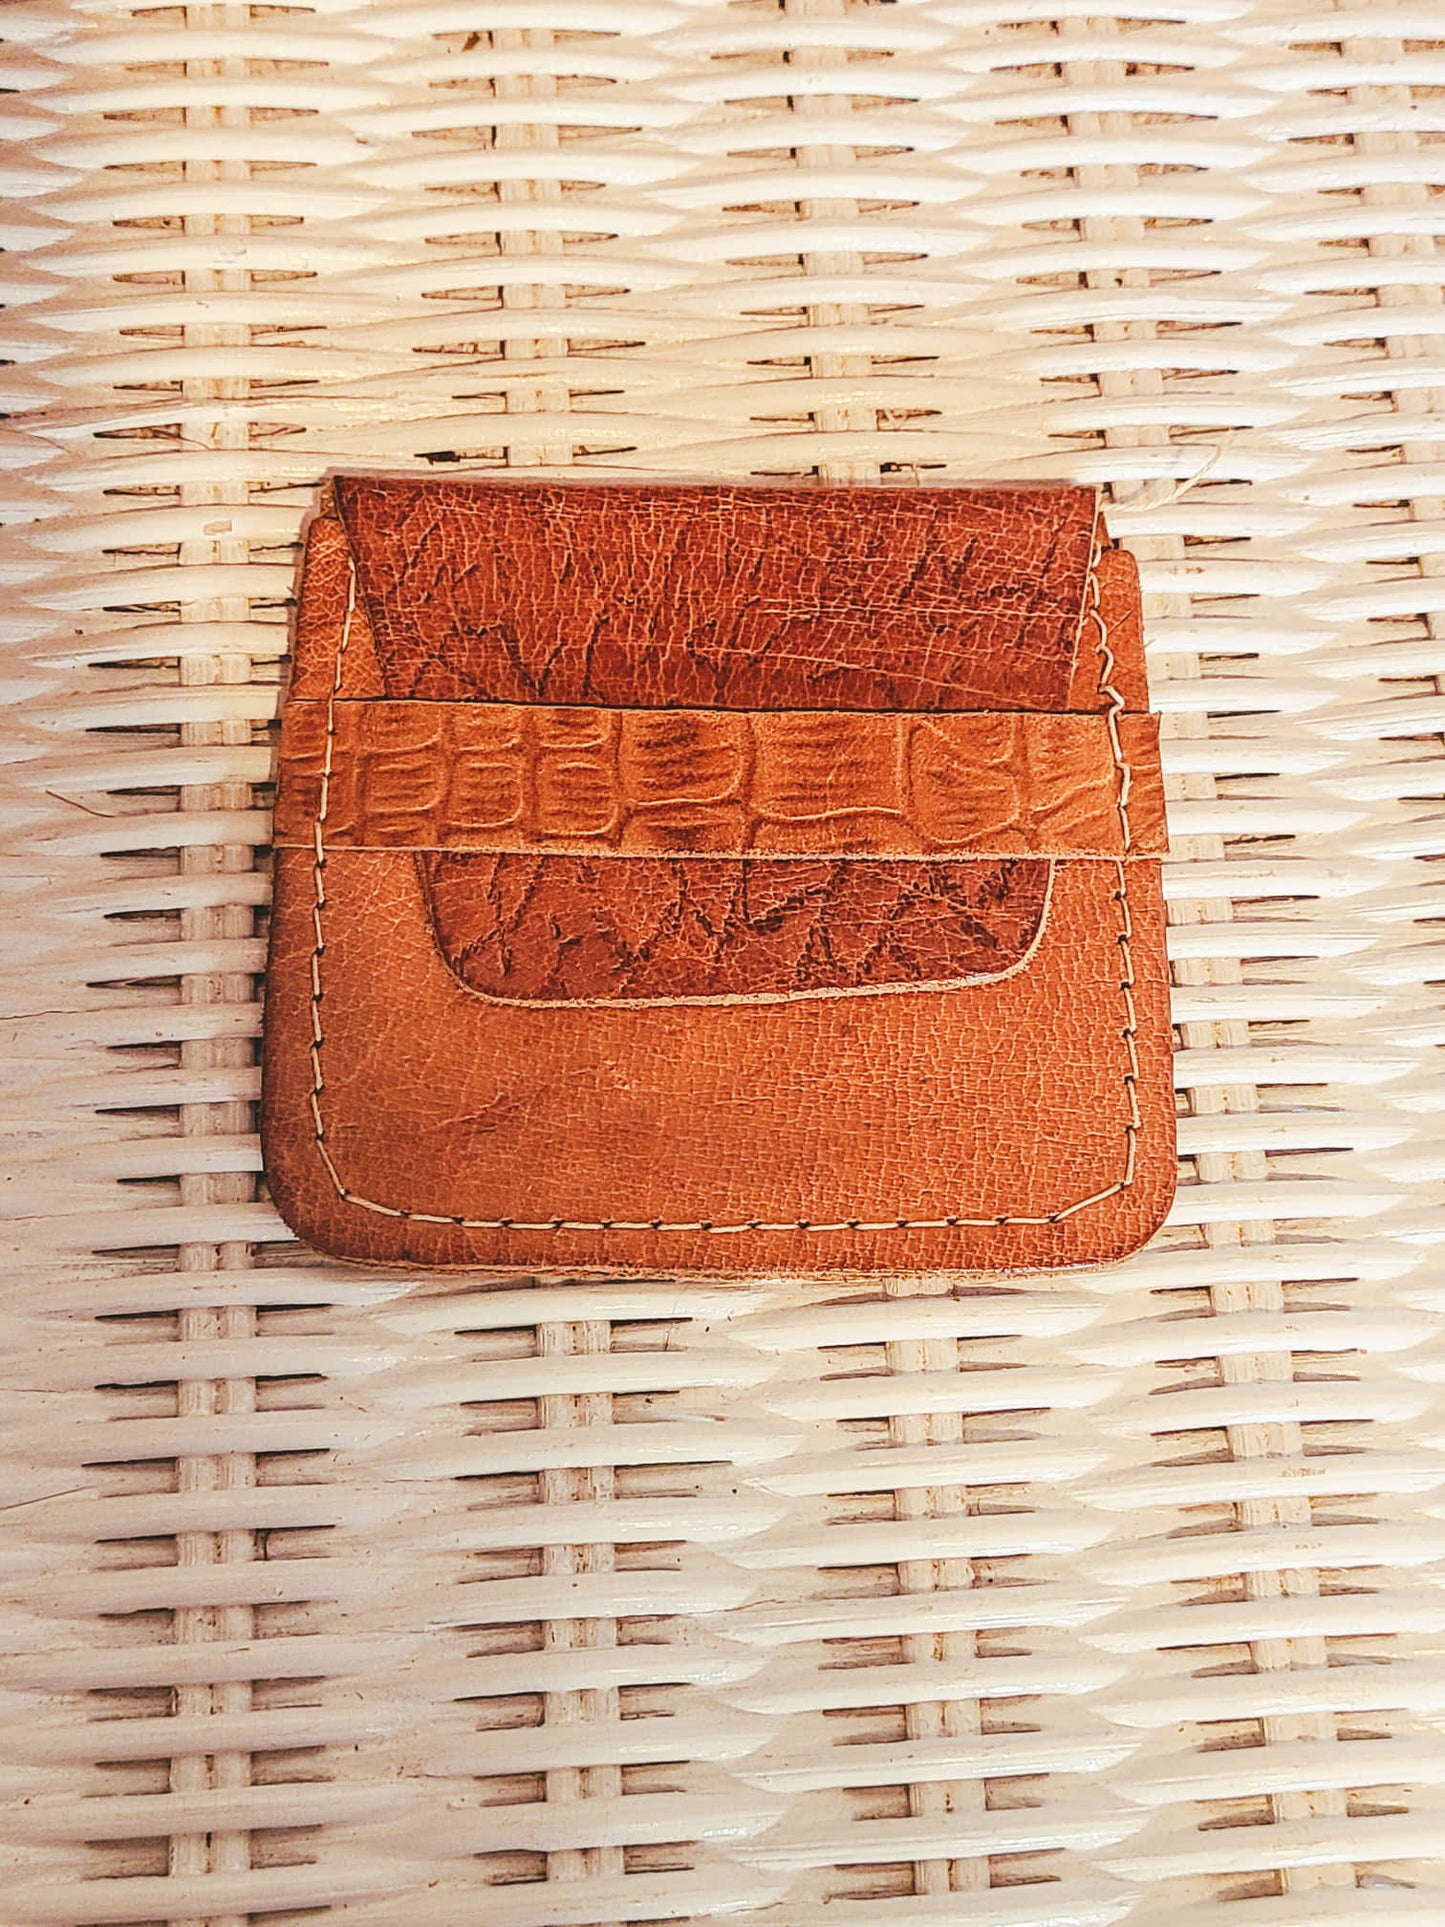 Egyptian Vintage Clutch with change purse